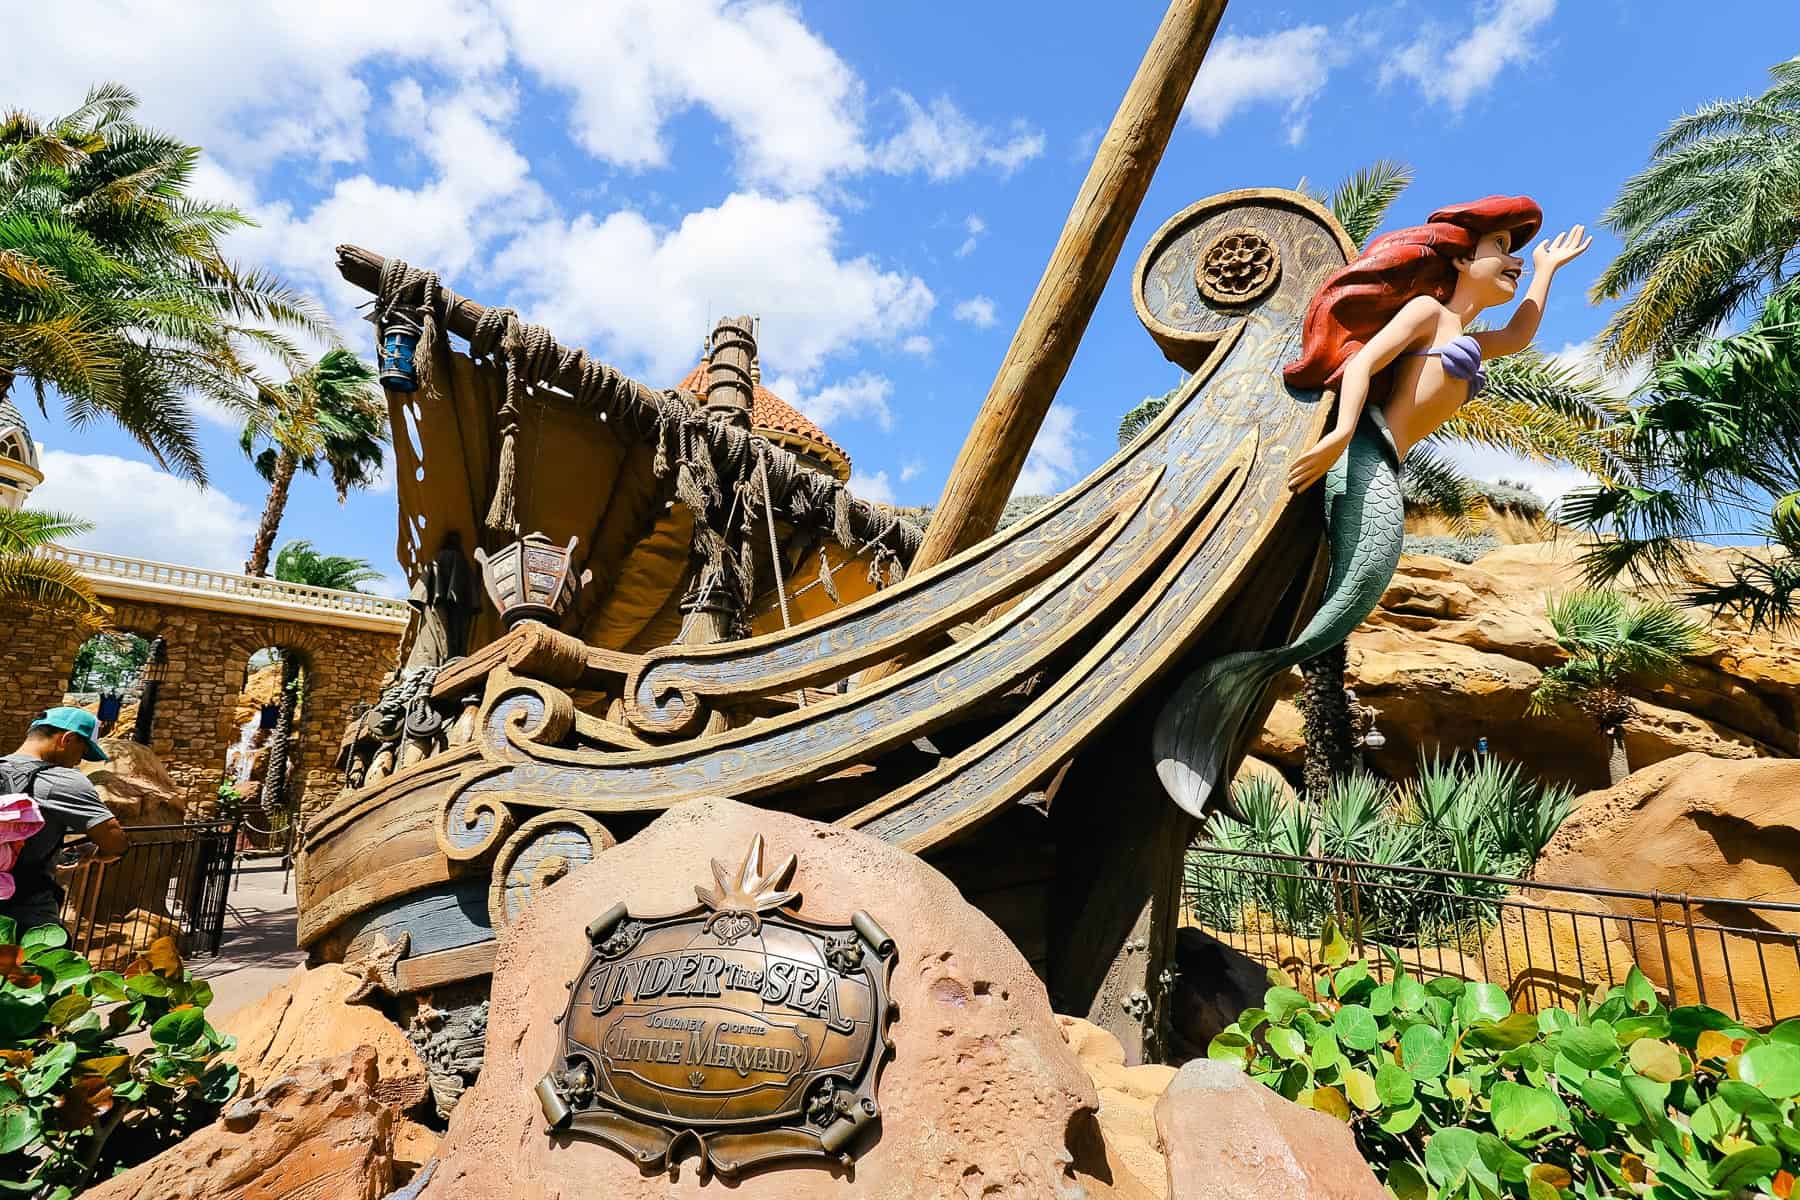 A hand-carved Ariel is attached to the front of the ship. 